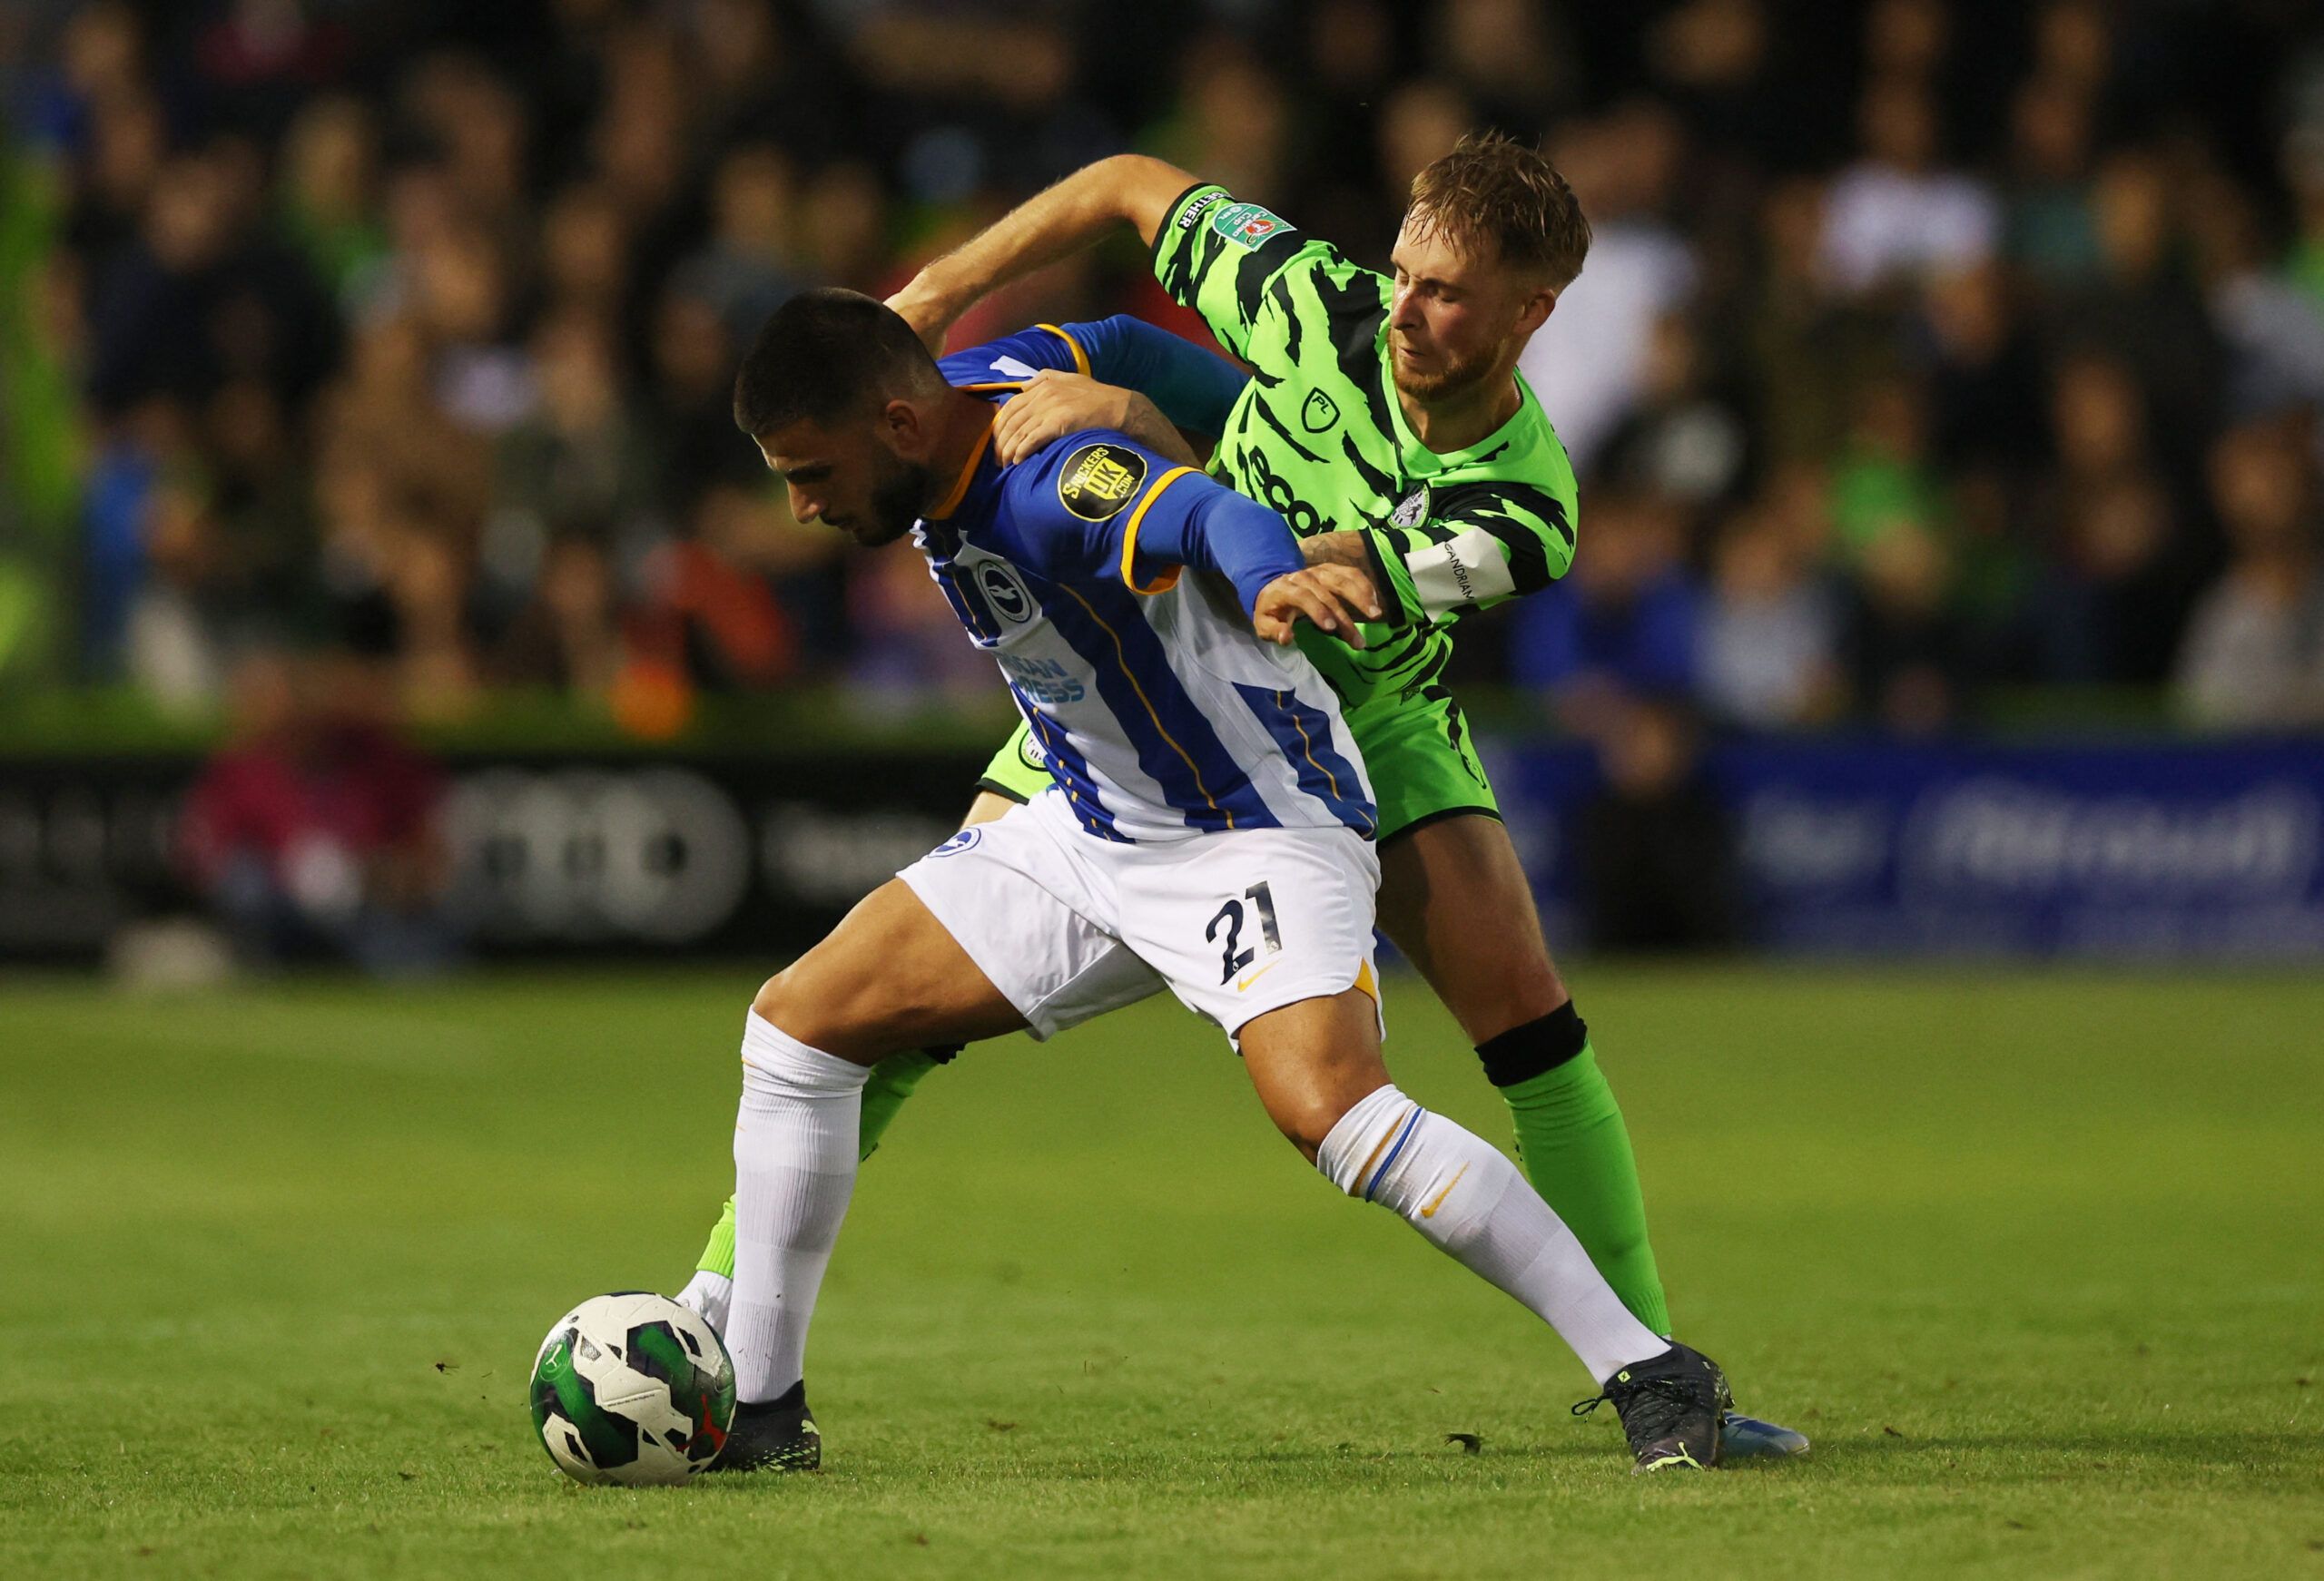 Soccer Football - Carabao Cup Second Round - Forest Green Rovers v Brighton &amp; Hove Albion - The New Lawn, Nailsworth, Britain - August 24, 2022 Forest Green Rovers' Ben Stevenson in action with Brighton &amp; Hove Albion's Deniz Undav Action Images via Reuters/Matthew Childs EDITORIAL USE ONLY. No use with unauthorized audio, video, data, fixture lists, club/league logos or 'live' services. Online in-match use limited to 75 images, no video emulation. No use in betting, games or single club 